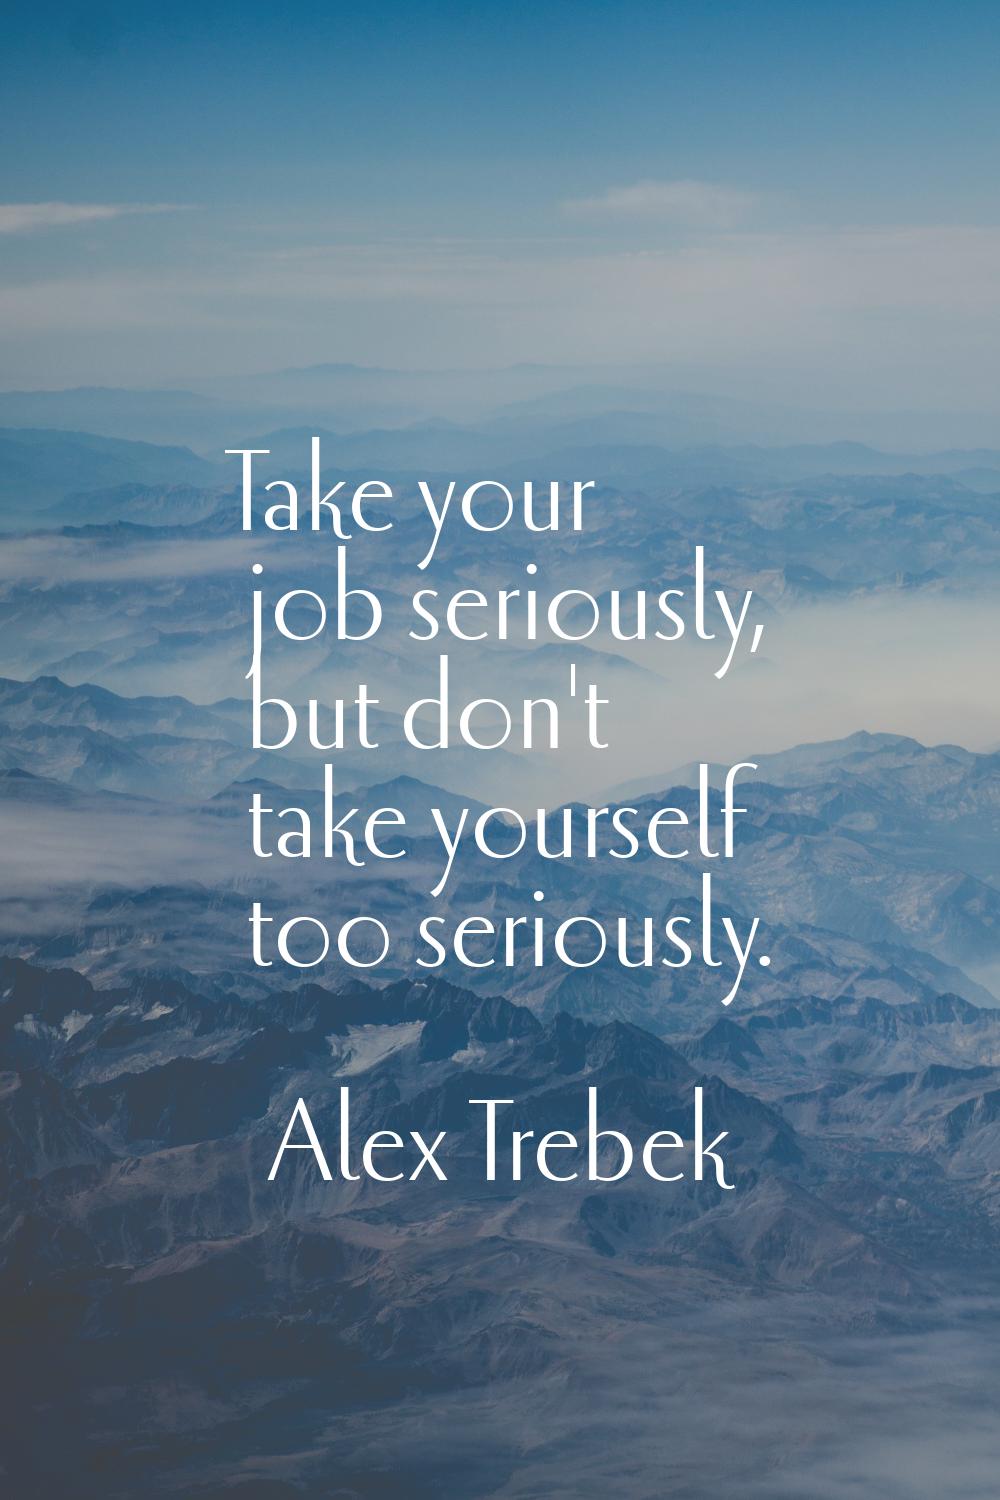 Take your job seriously, but don't take yourself too seriously.